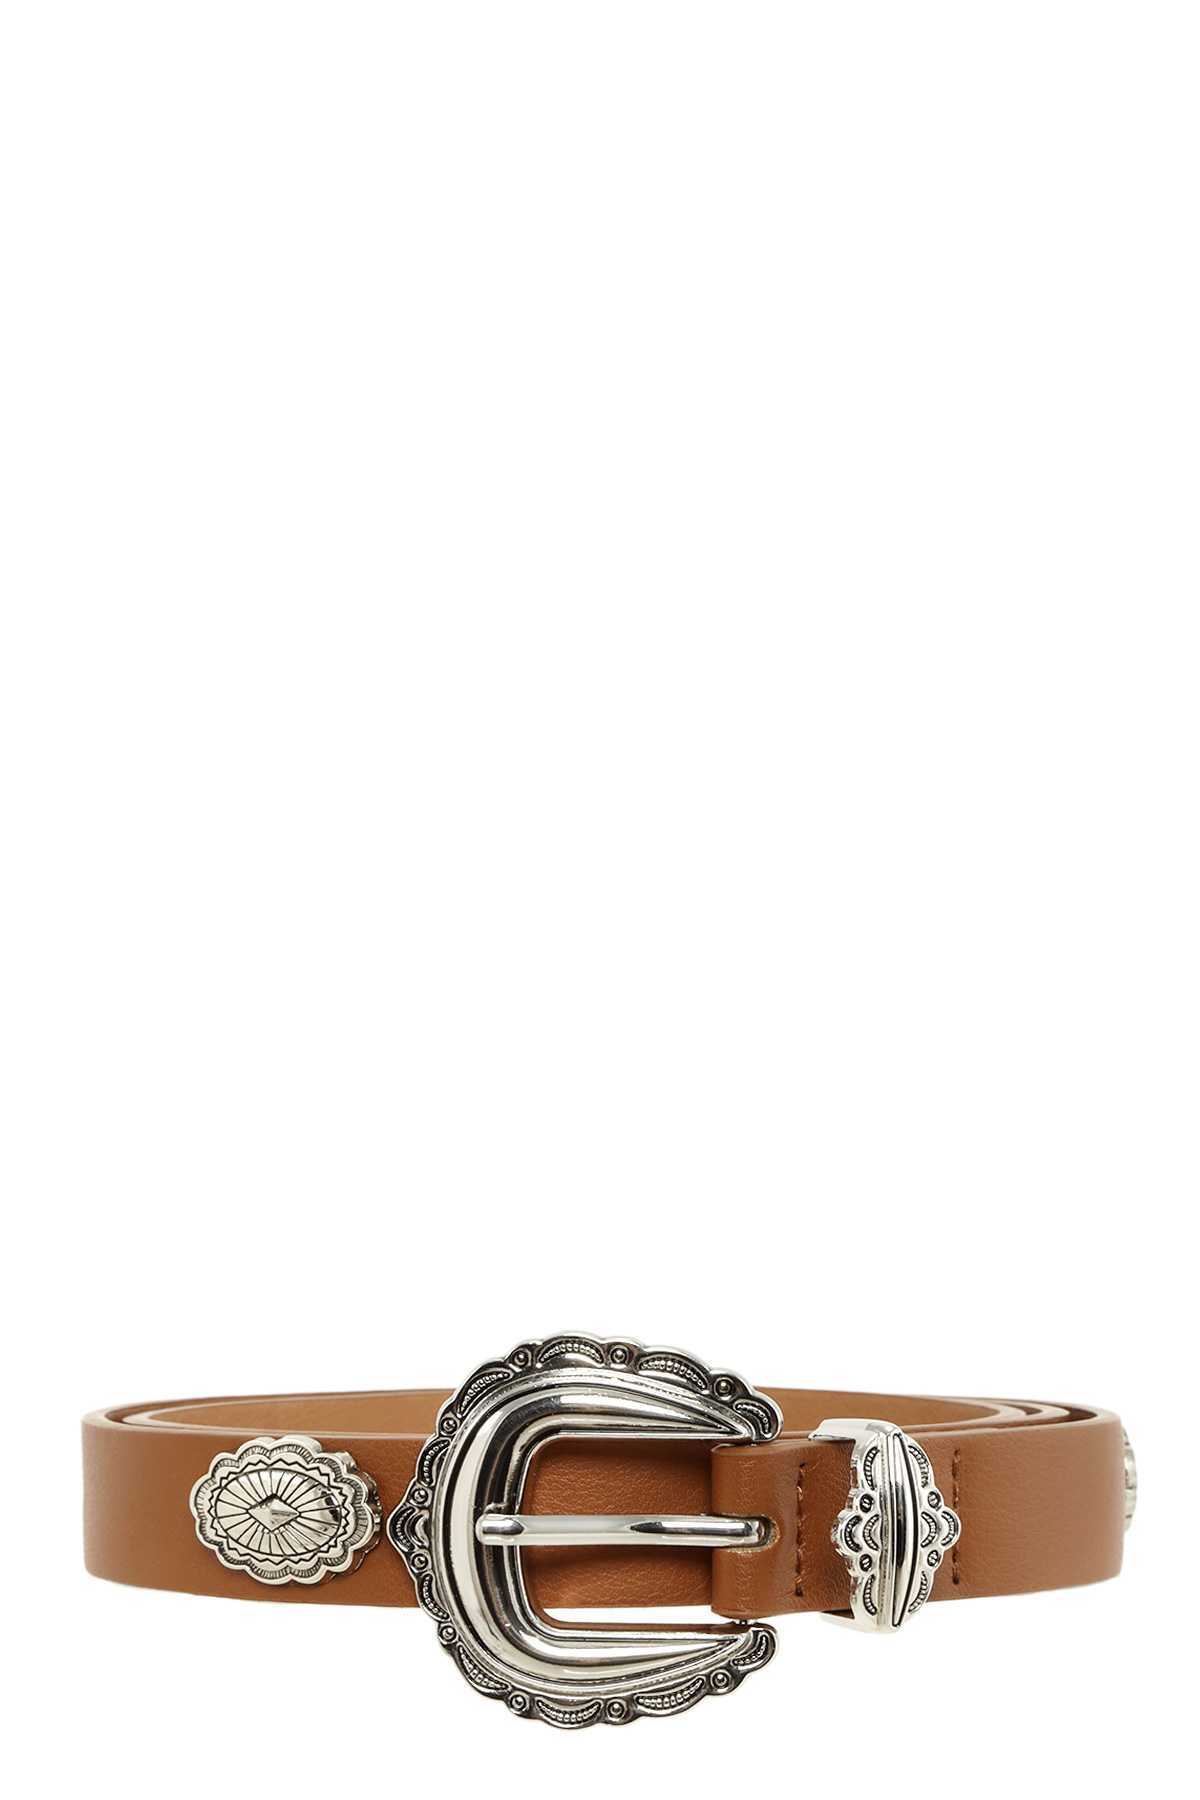 ETCHED BUCKLE FAUX LEATHER BELT